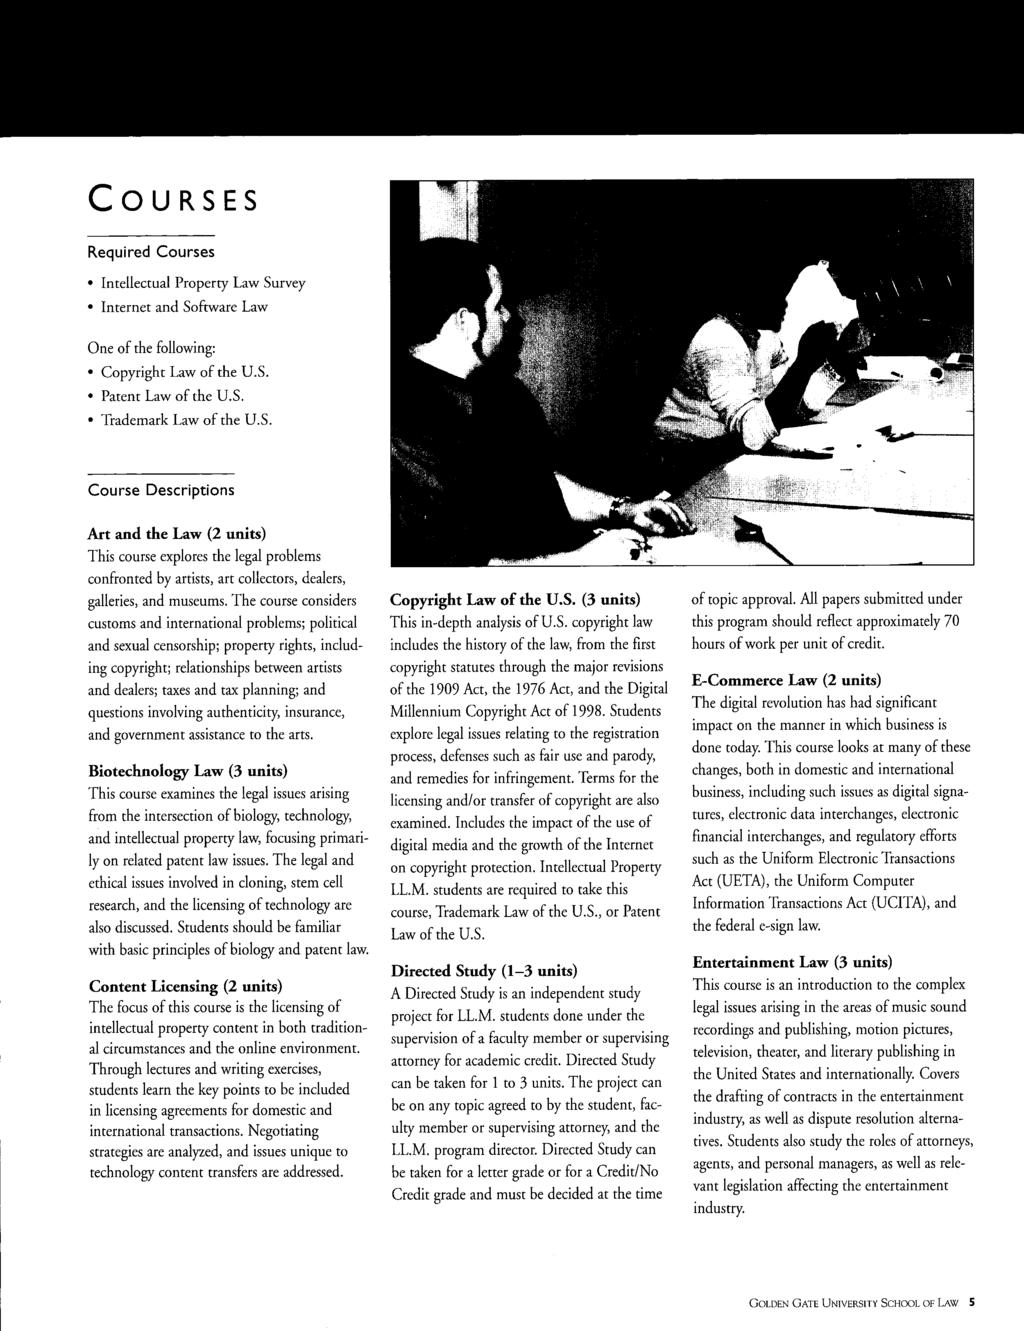 COURSES Required Courses Intellectual Property Law Survey Internet and Sofuvare Law One of the following: Copyright Law of the u.s. Patent Law of the U.S. Trademark Law of the U.S. Course Descriptions Art and the Law (2 units) This course explores the legal problems confronted by artists, art collectors, dealers, galleries, and museums.